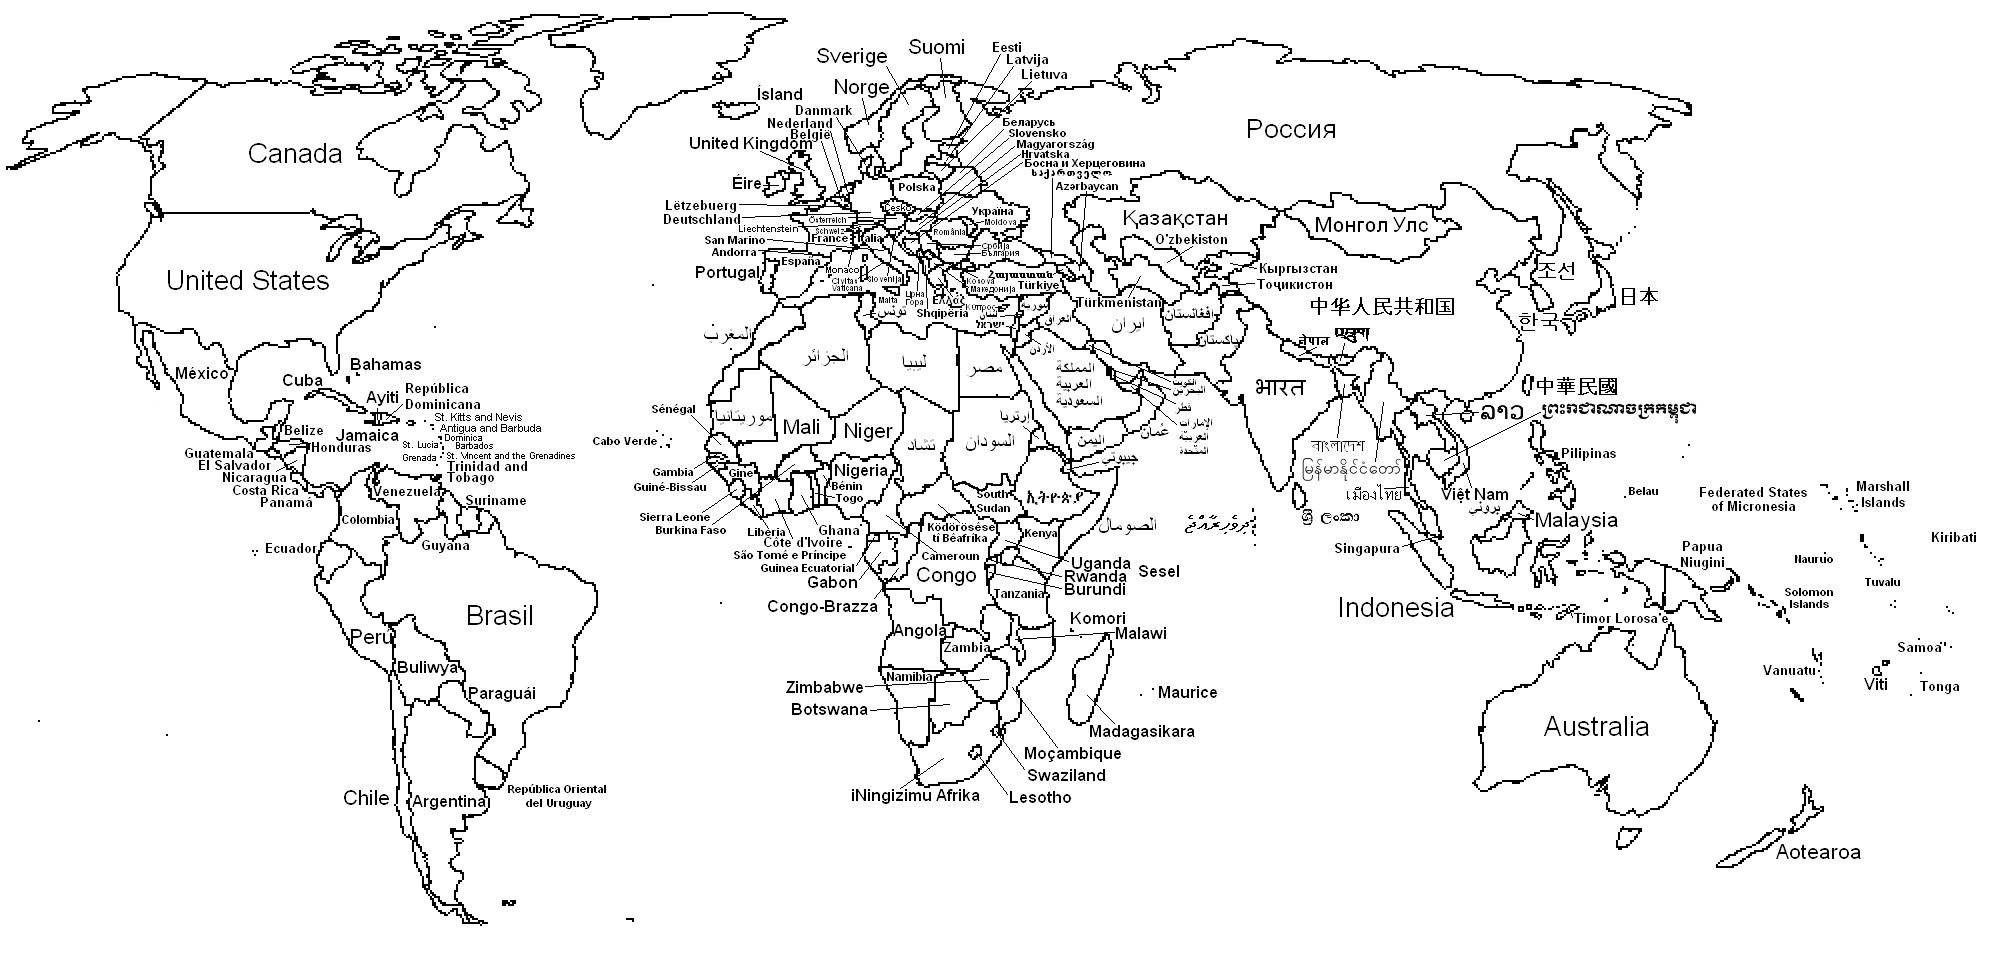 World Map Outline With Countries Labeled Lit Pinterest Inside - Printable World Map For Kids